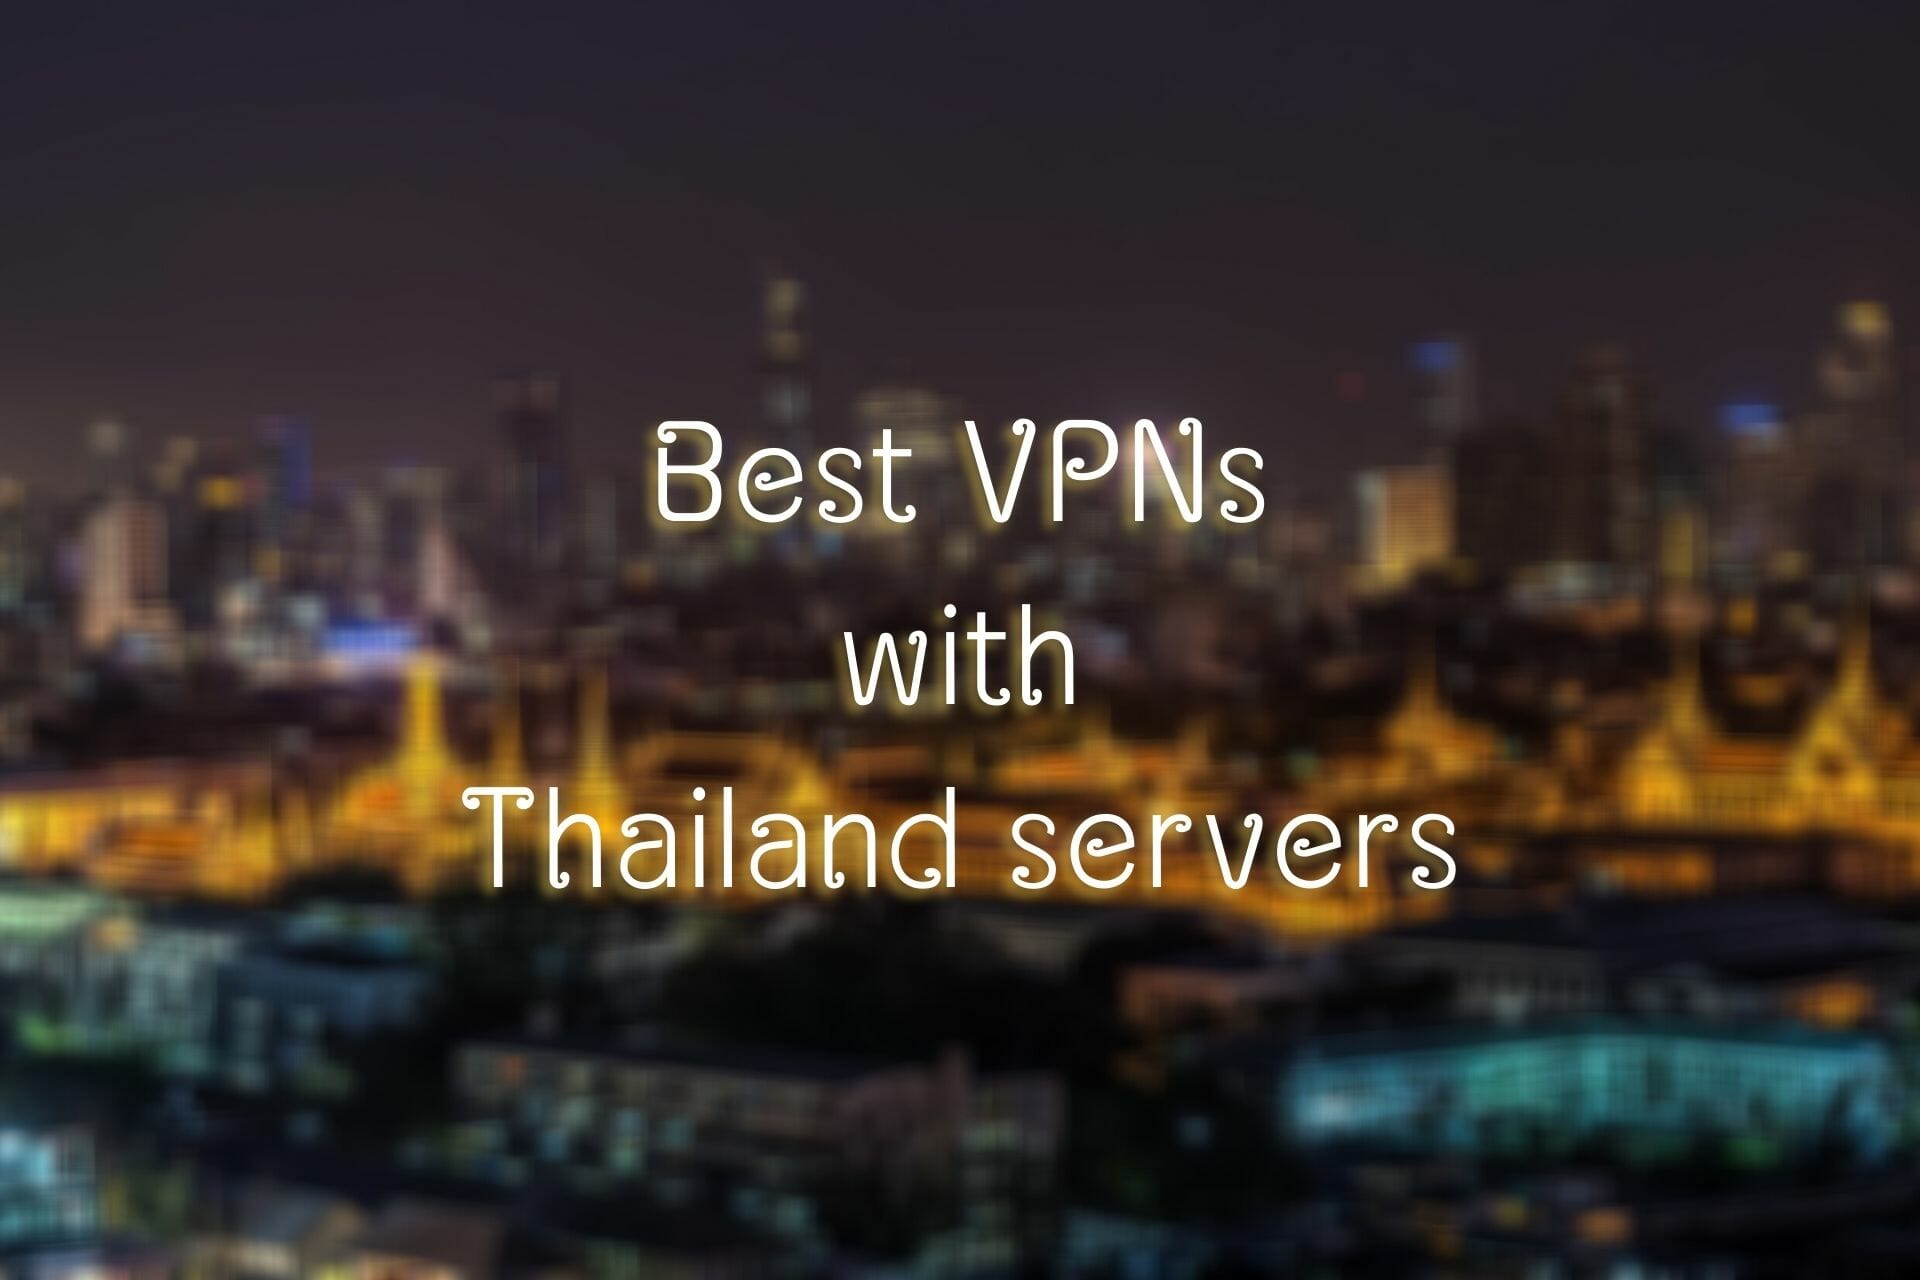 Best VPNs with Thailand servers